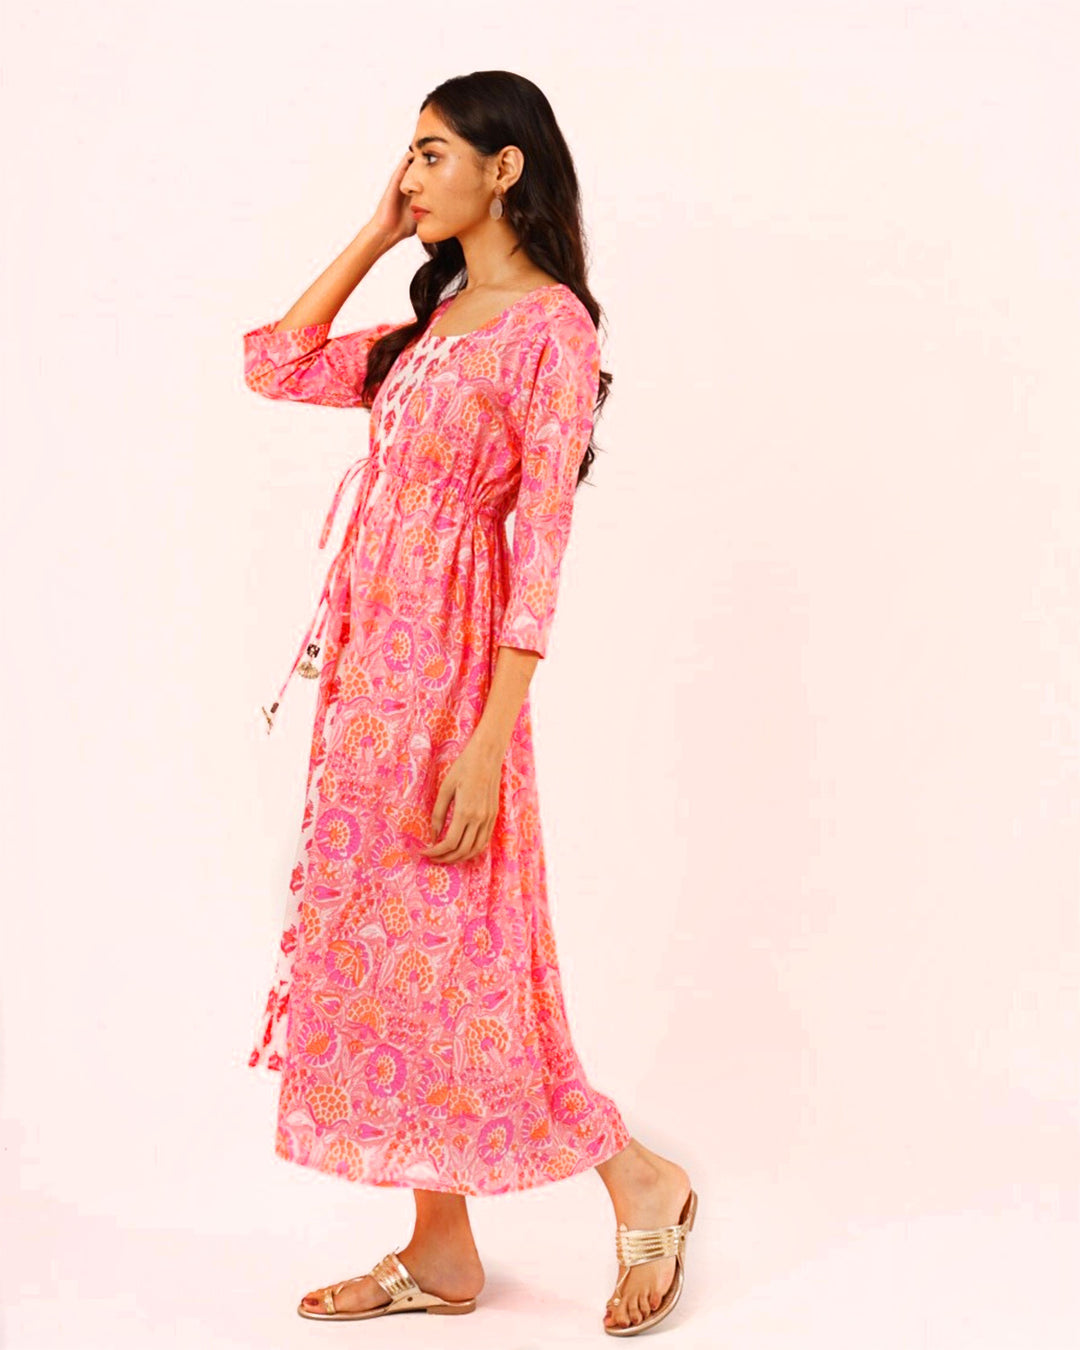 Printed Pink Marigold Jacket With Cotton Dress